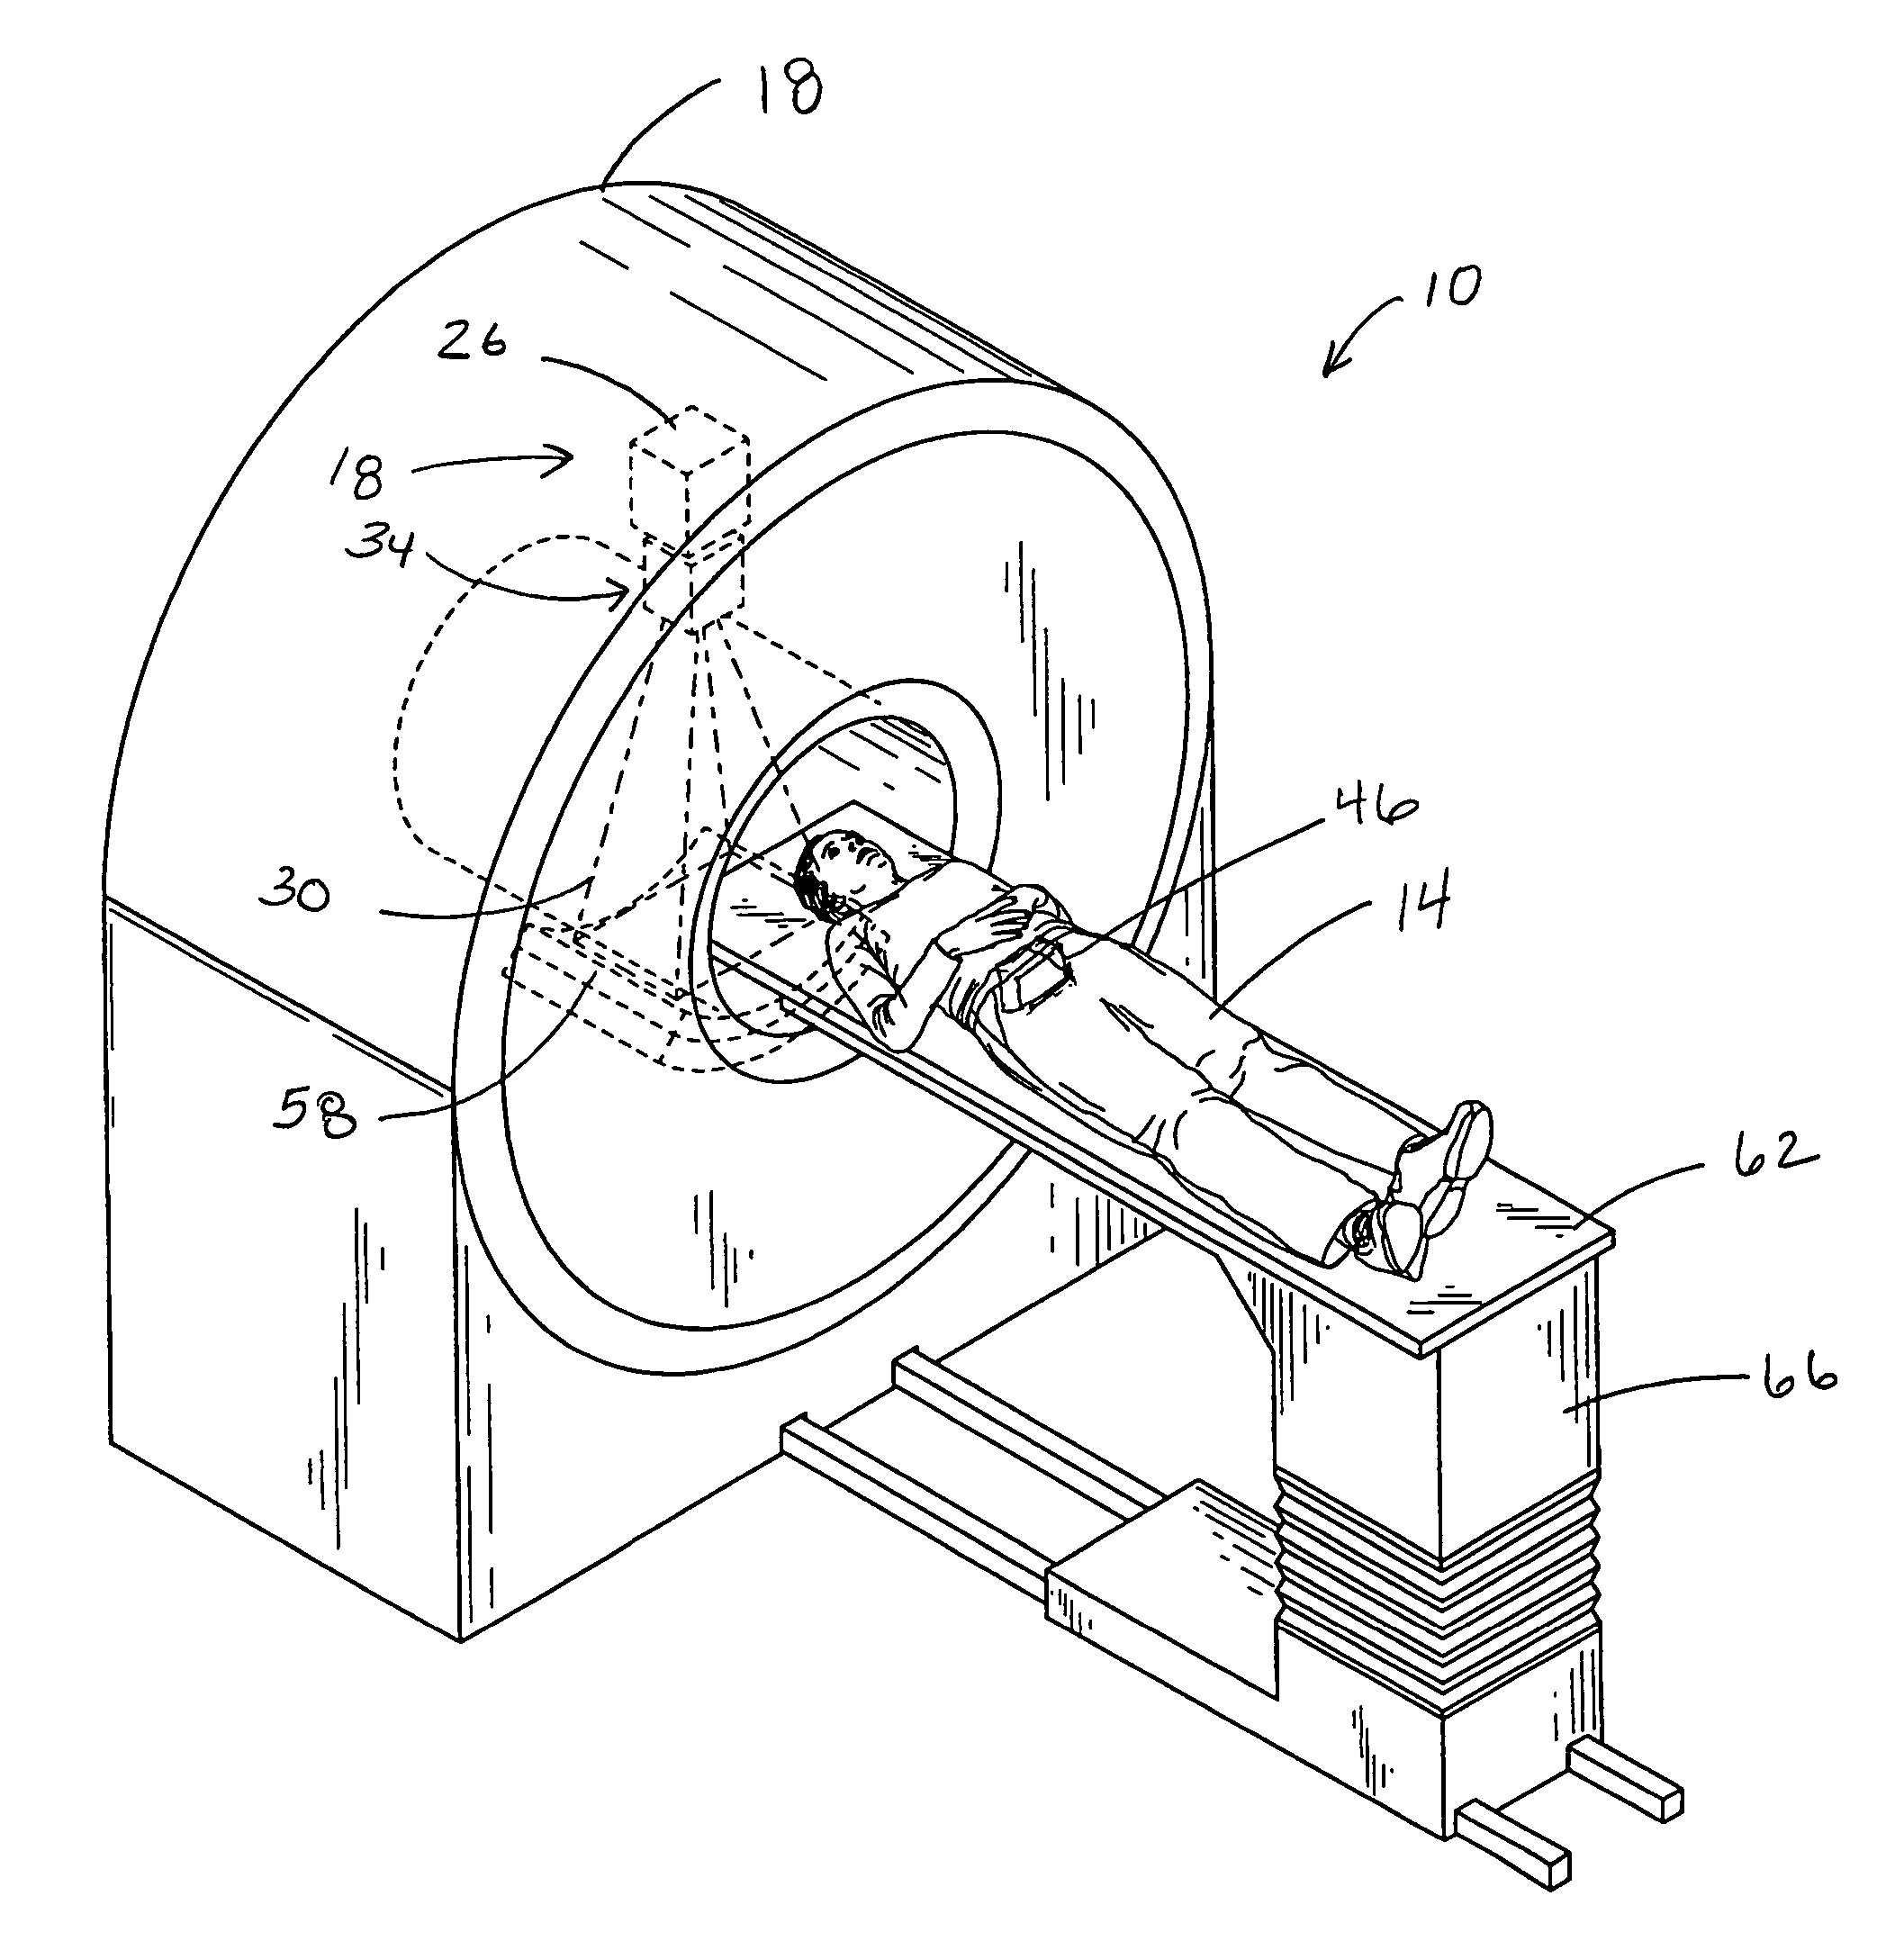 System and method of treating a patient with radiation therapy